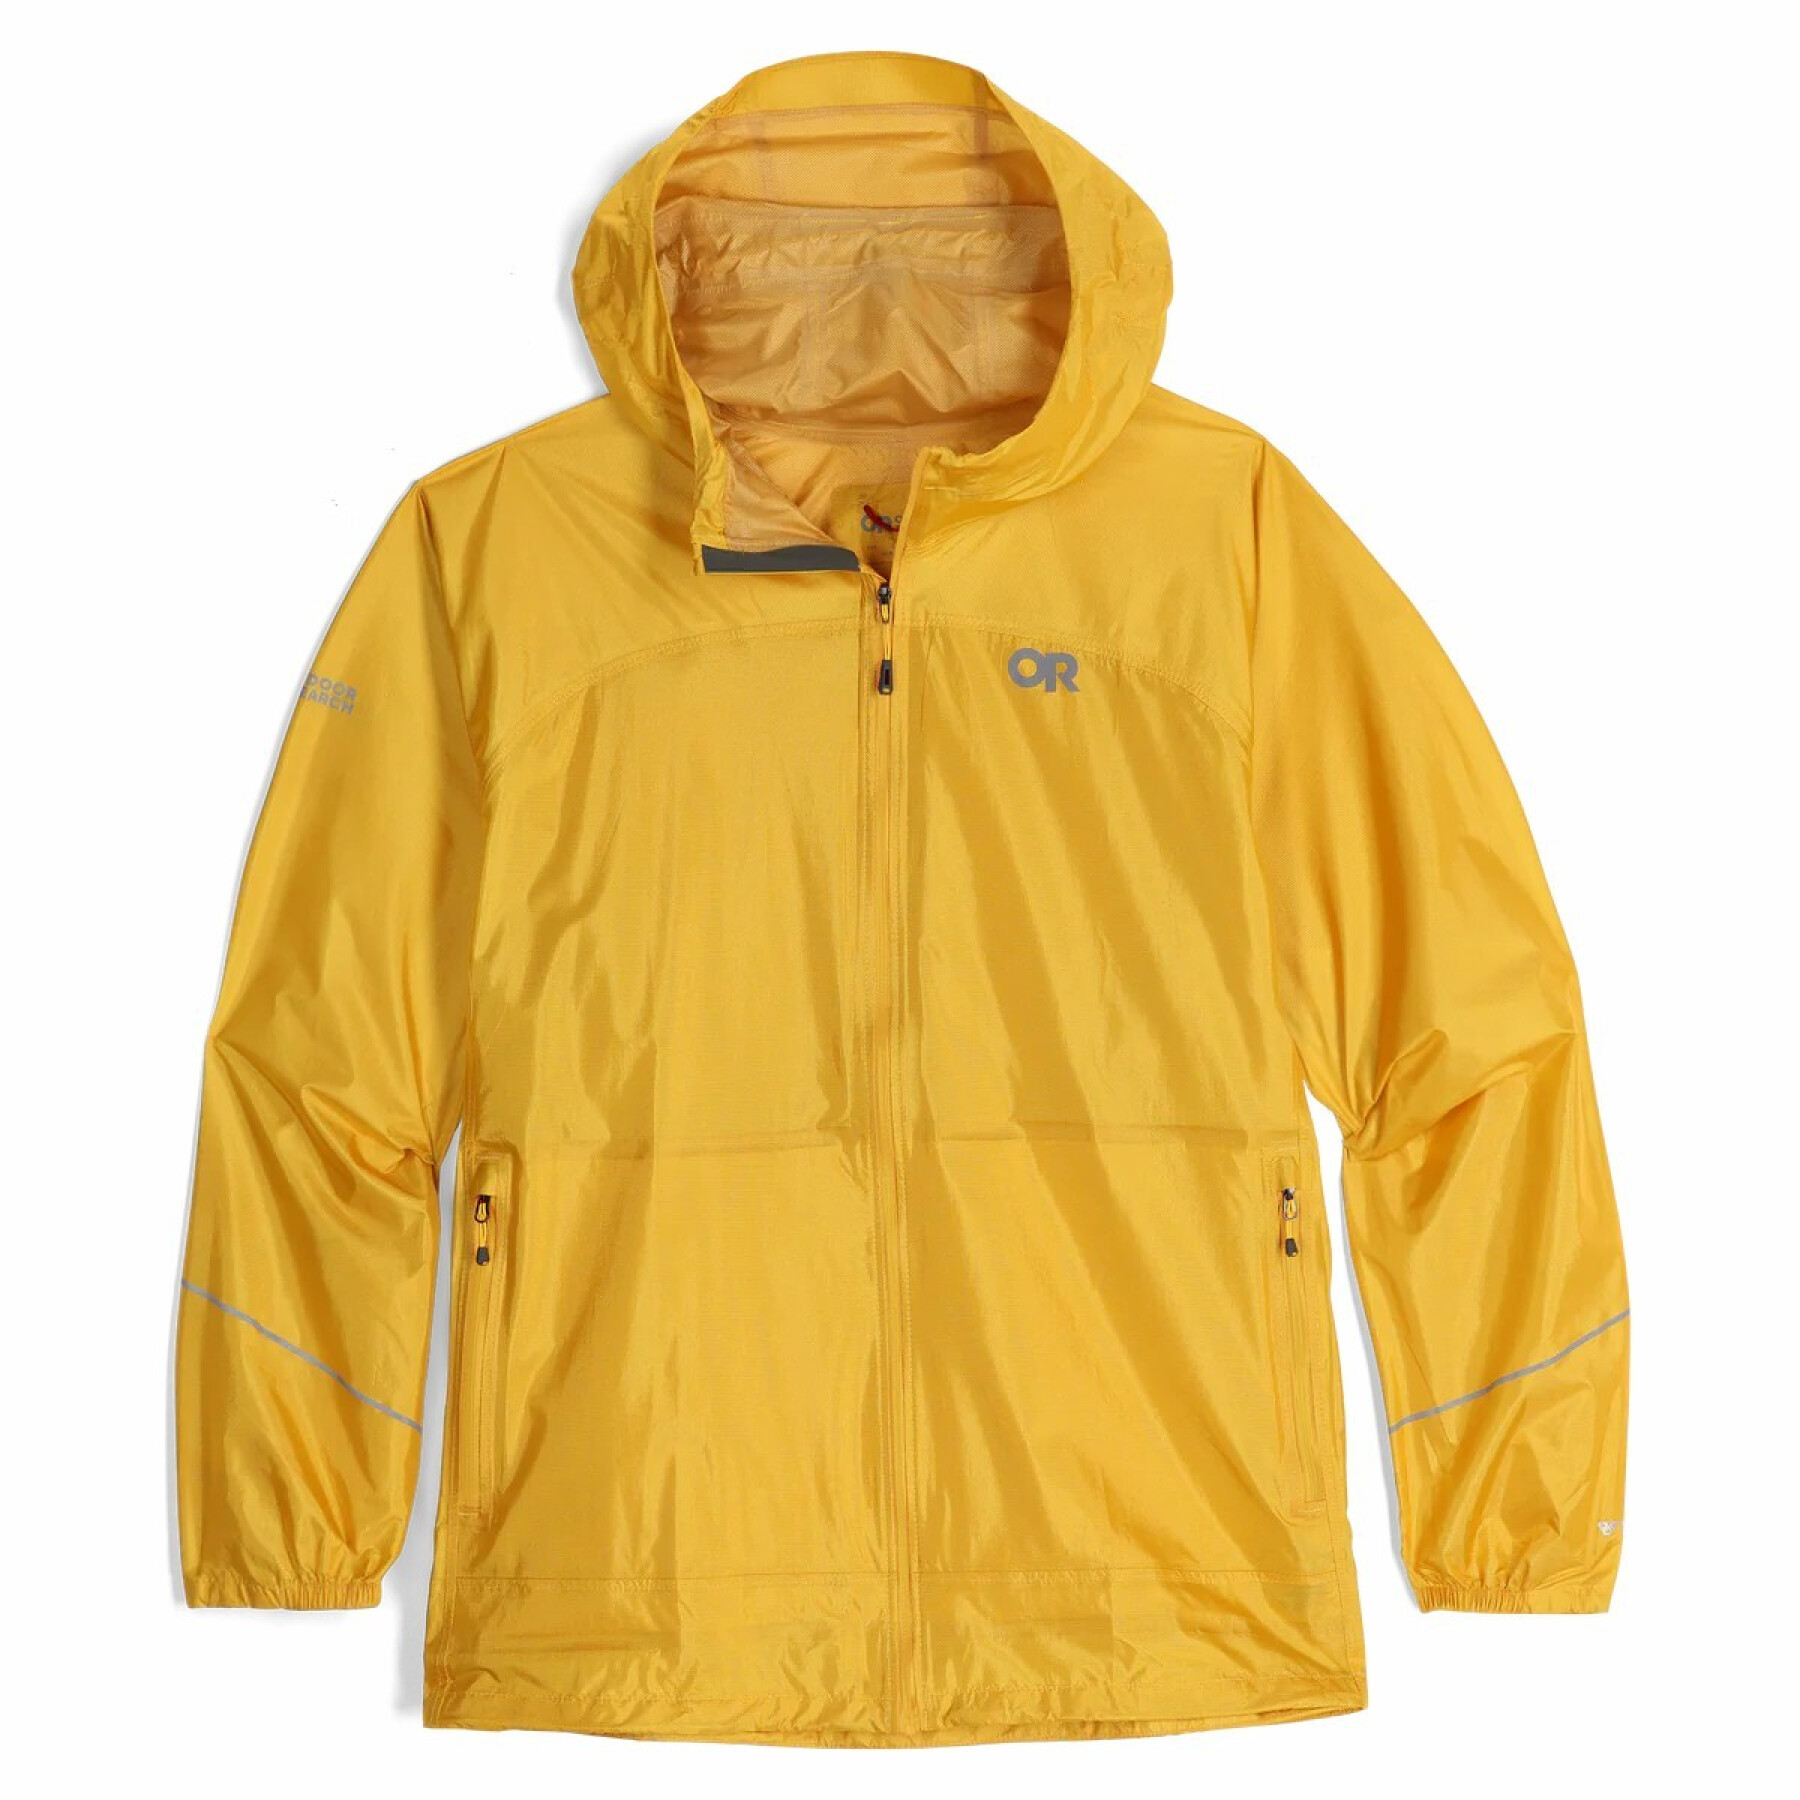 Chaqueta impermeable Outdoor Research Helium Plus